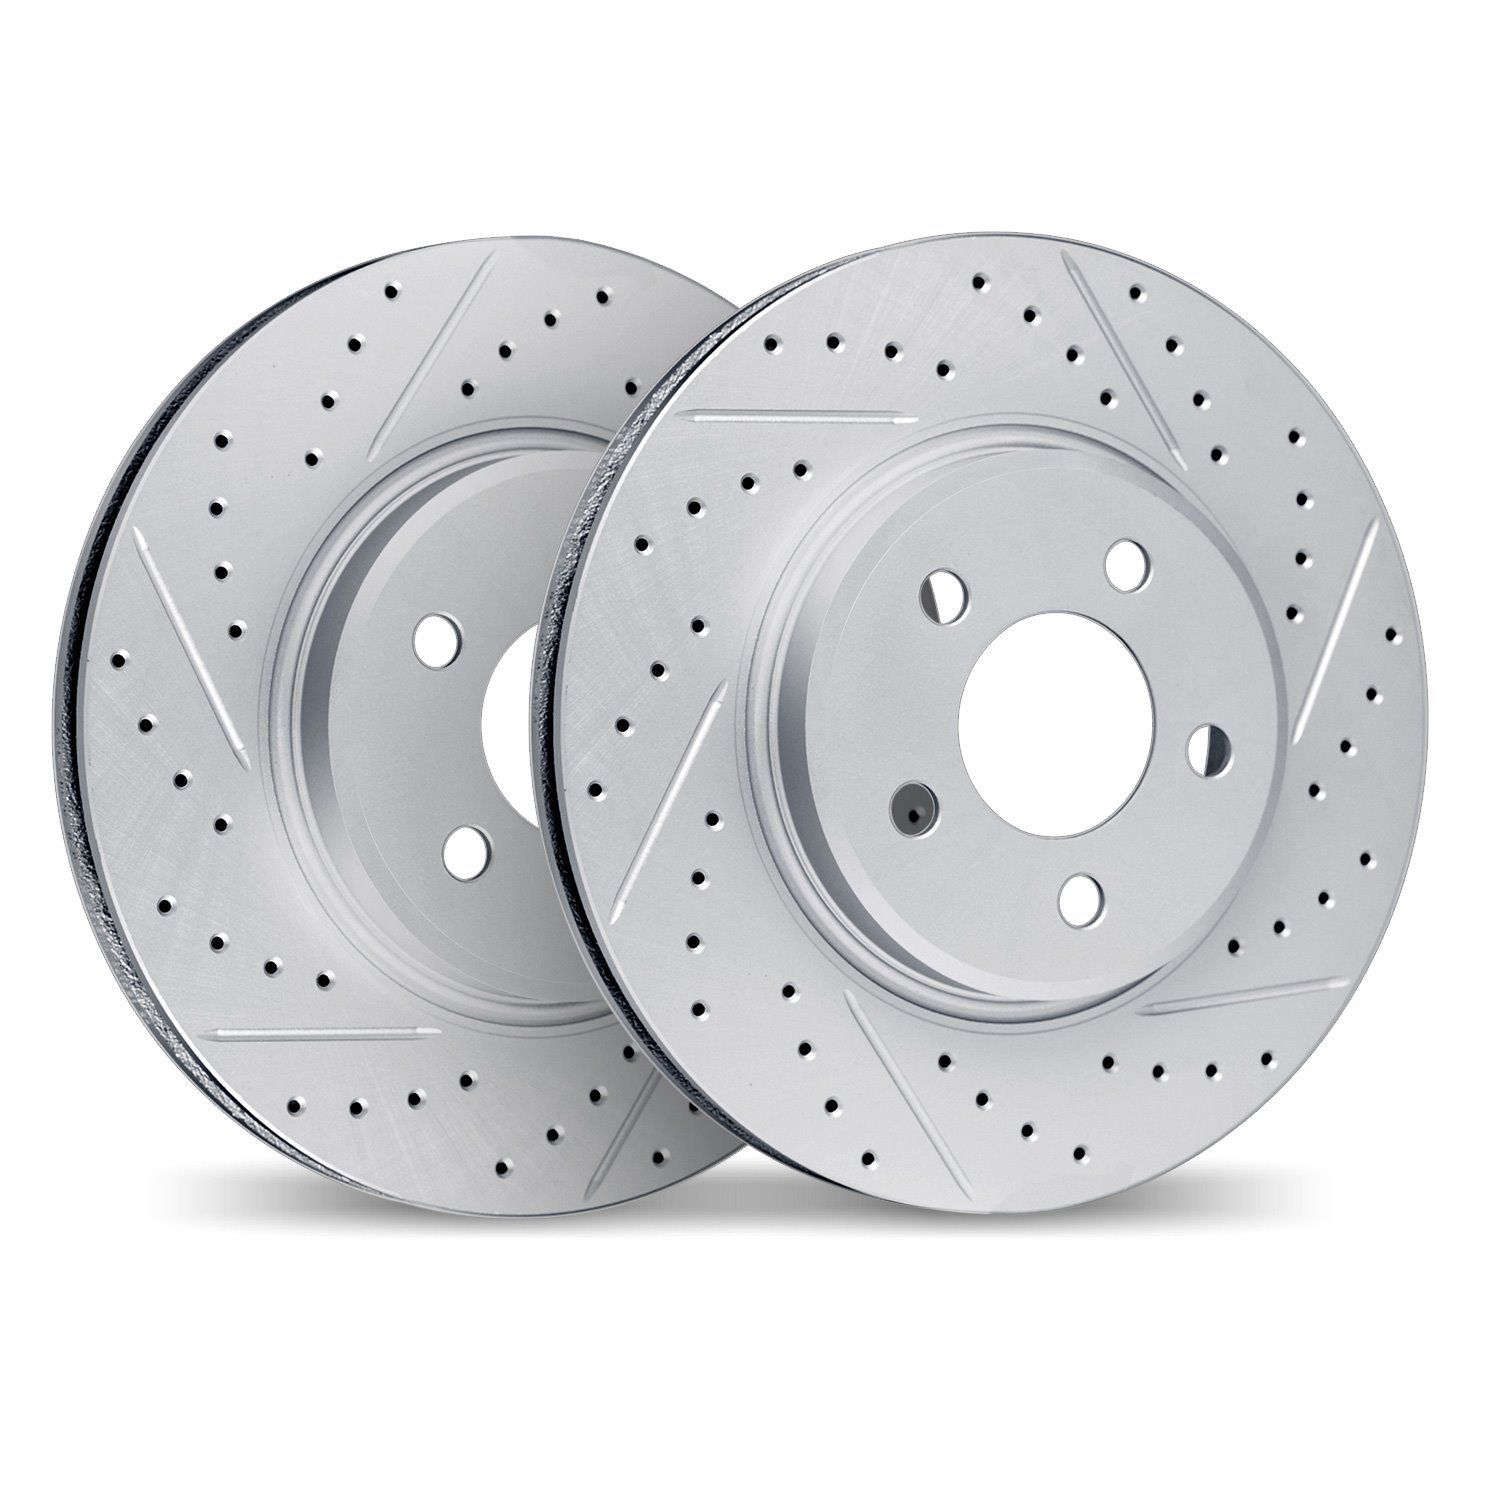 2002-76027 Geoperformance Drilled/Slotted Brake Rotors, Fits Select Lexus/Toyota/Scion, Position: Front